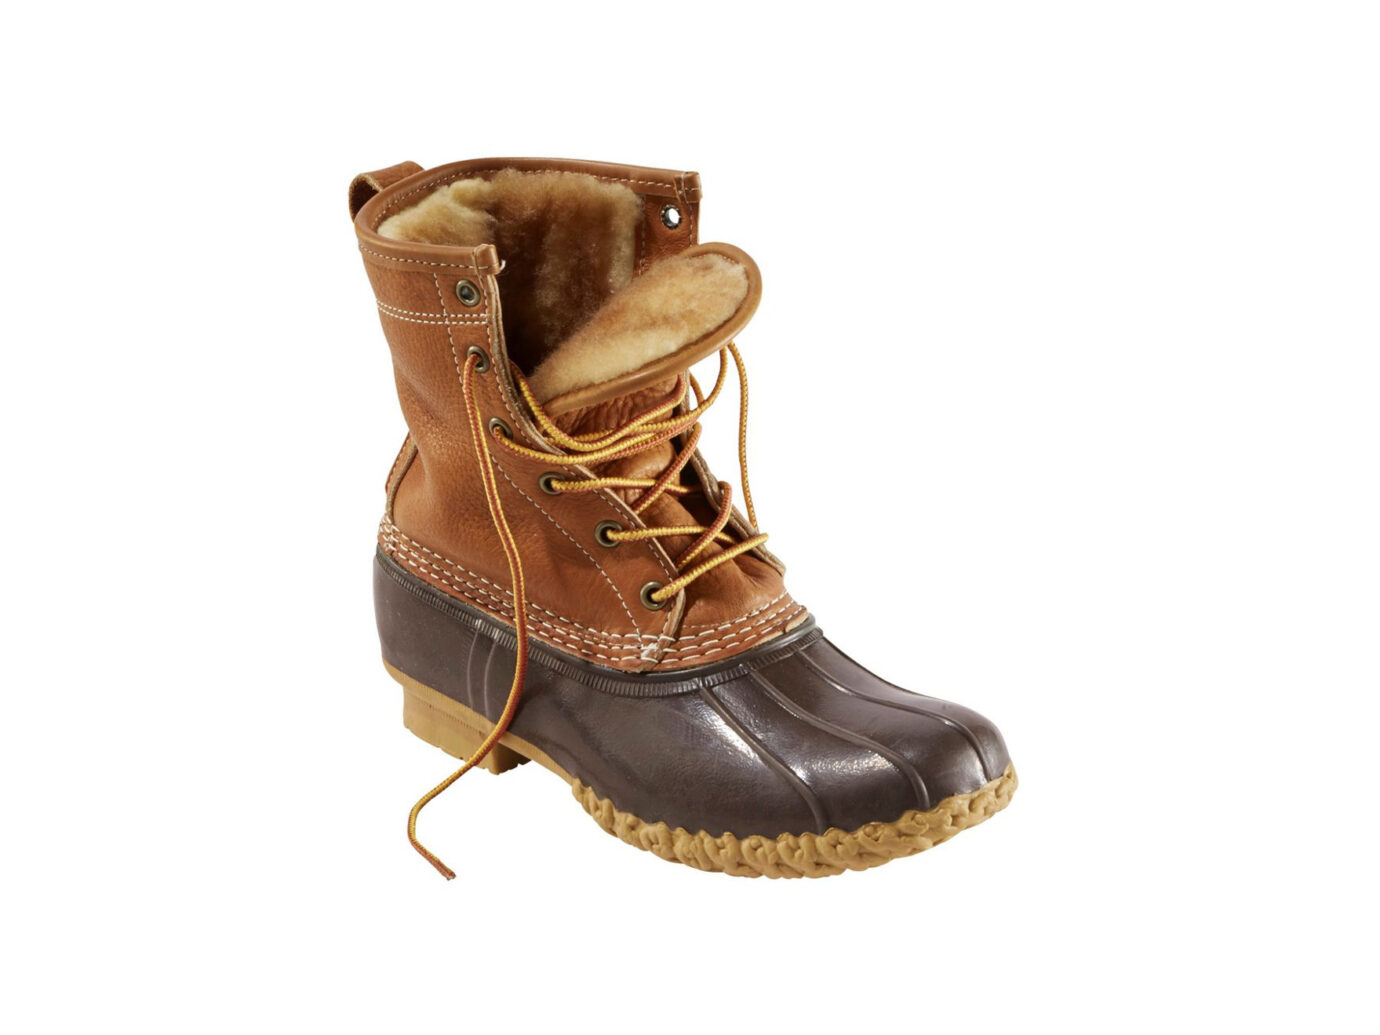 LL Bean 8” Tumbled-leather shearling lined bean Boot